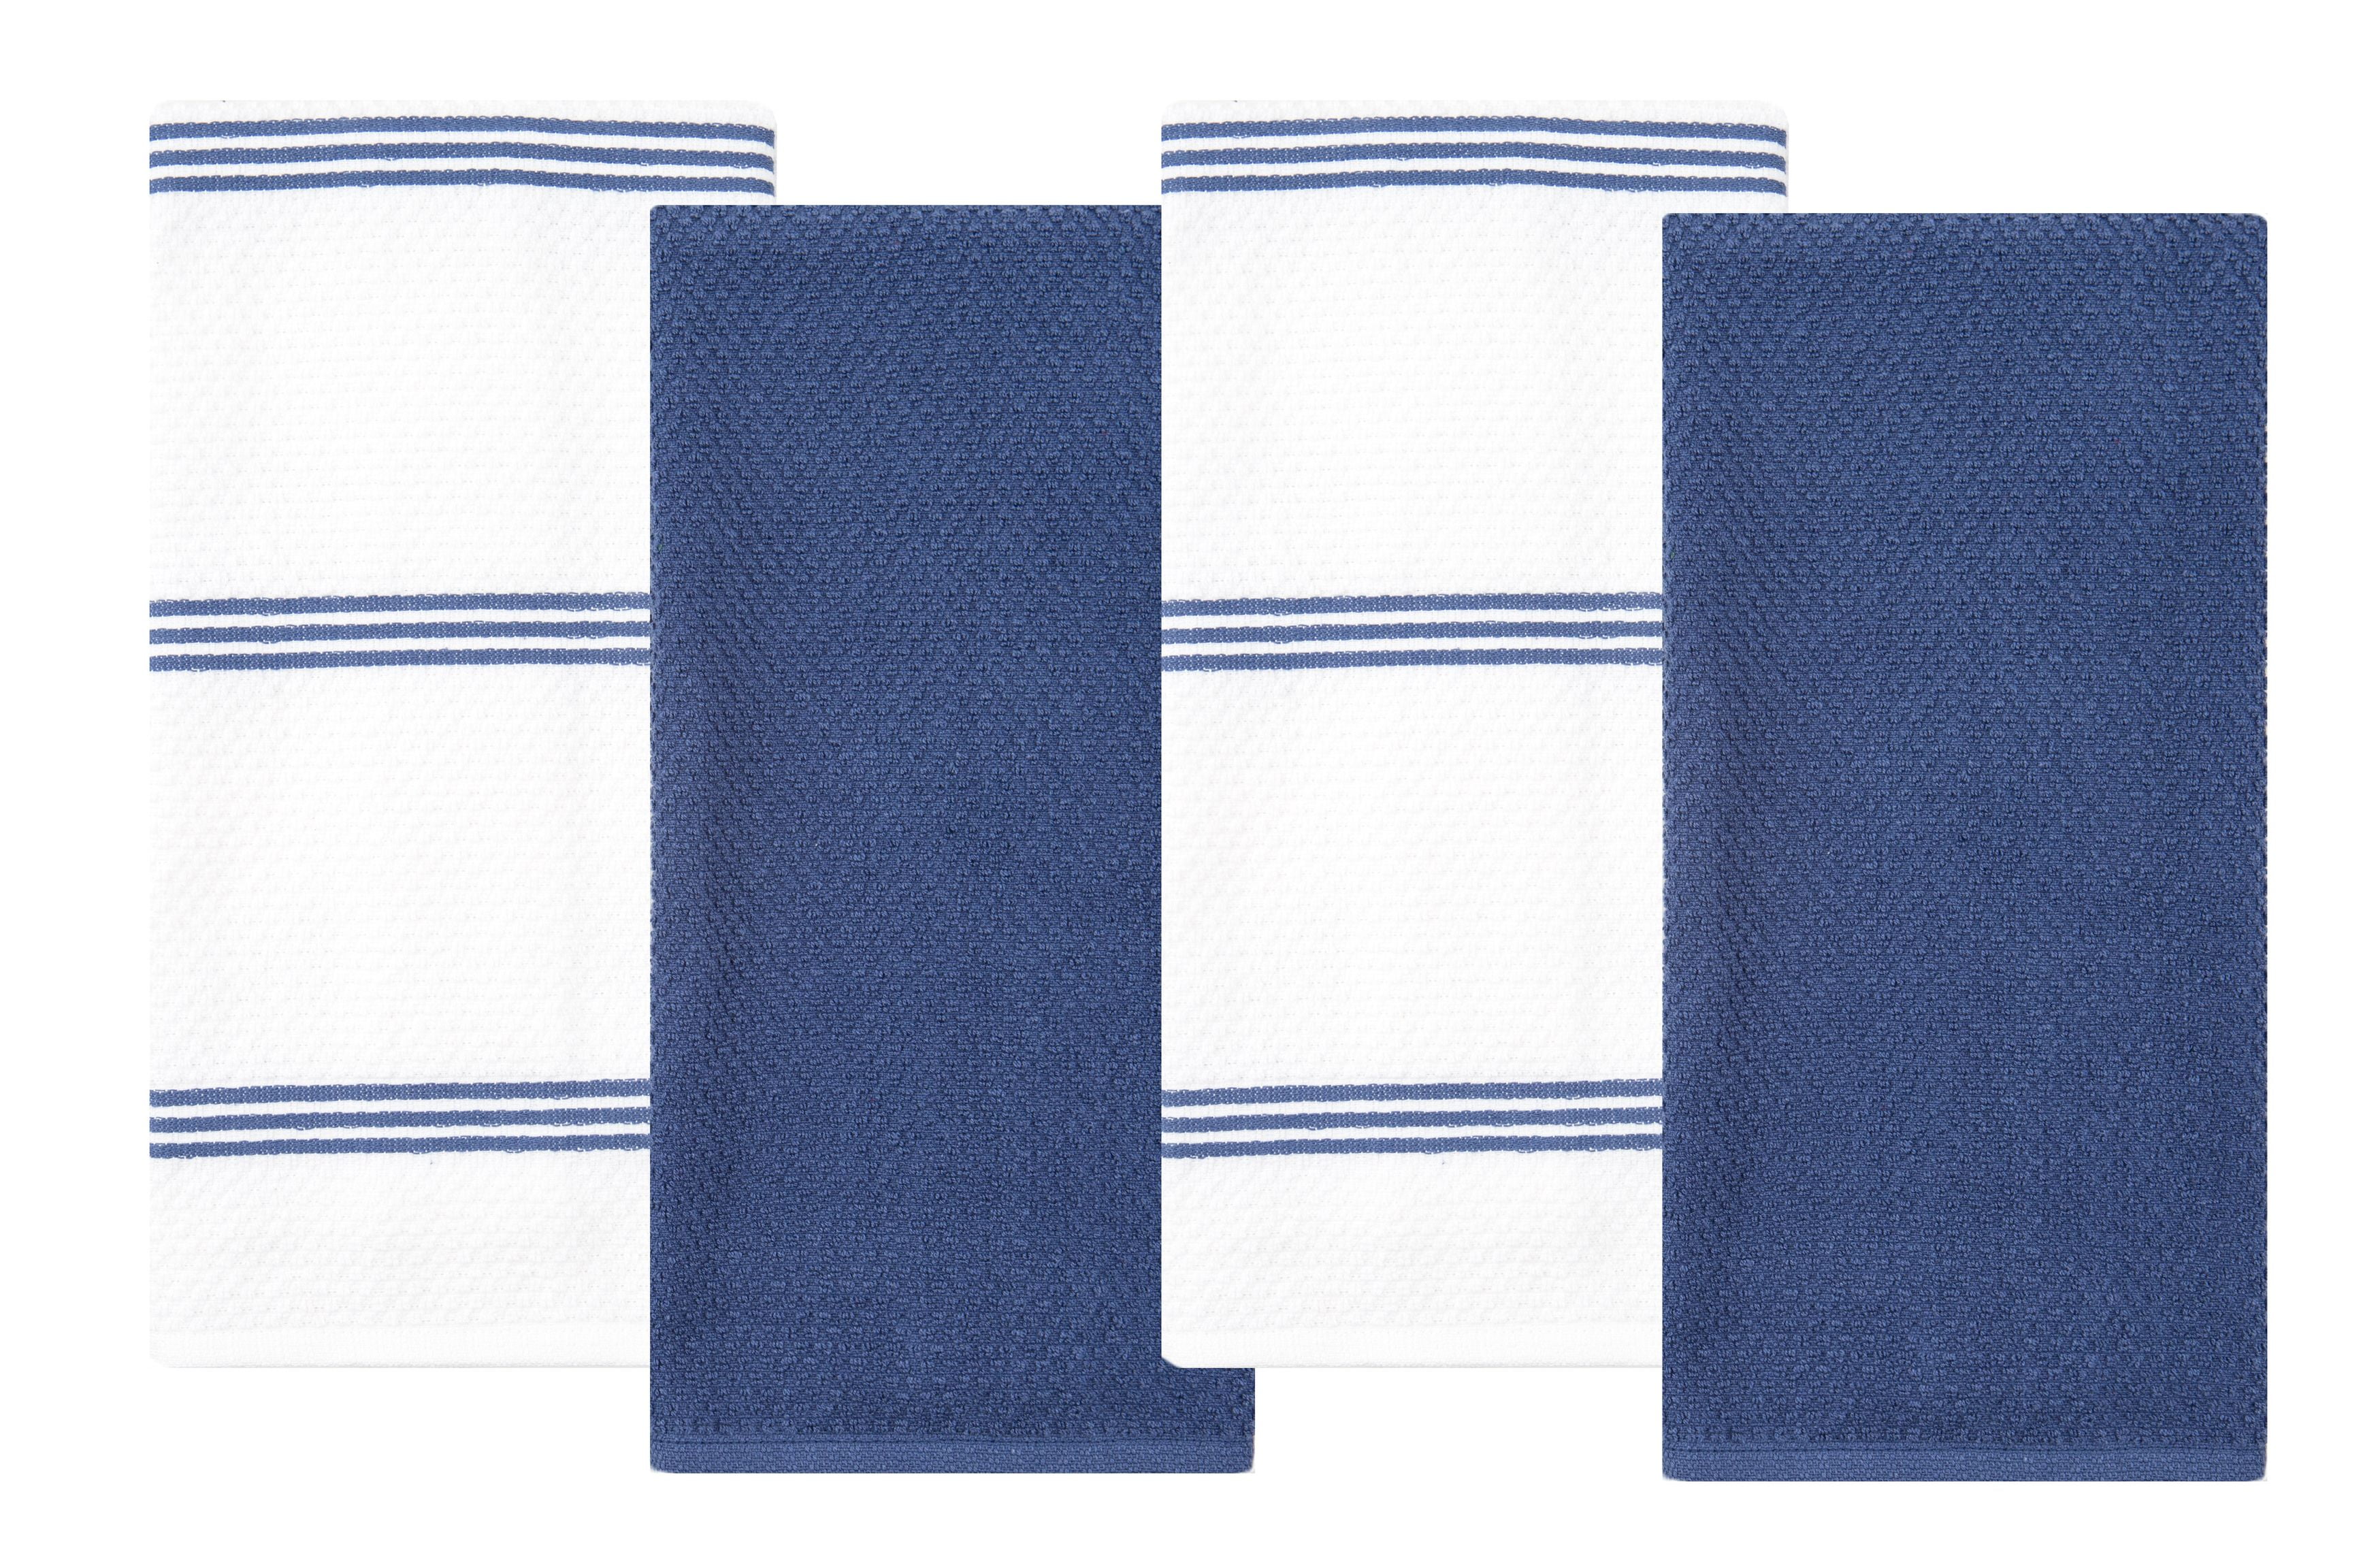 Sticky Toffee Kitchen Towels Dish Towels 100% Cotton, Set of 4, Dark Blue  and White Hand Towels, Tea Towels, Reusable Absorbent Cleaning Cloths, 28  in